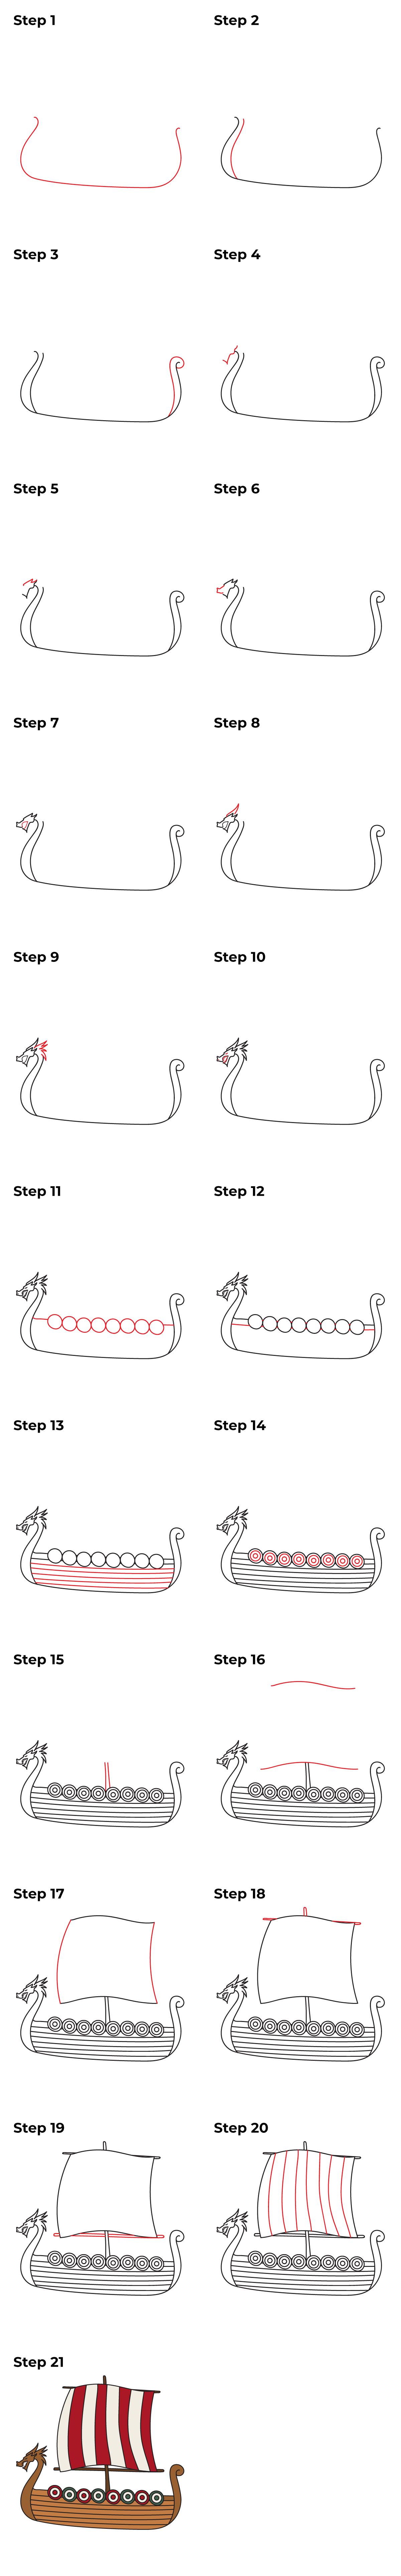 How to Draw a Viking Boat - Printable Tutorial